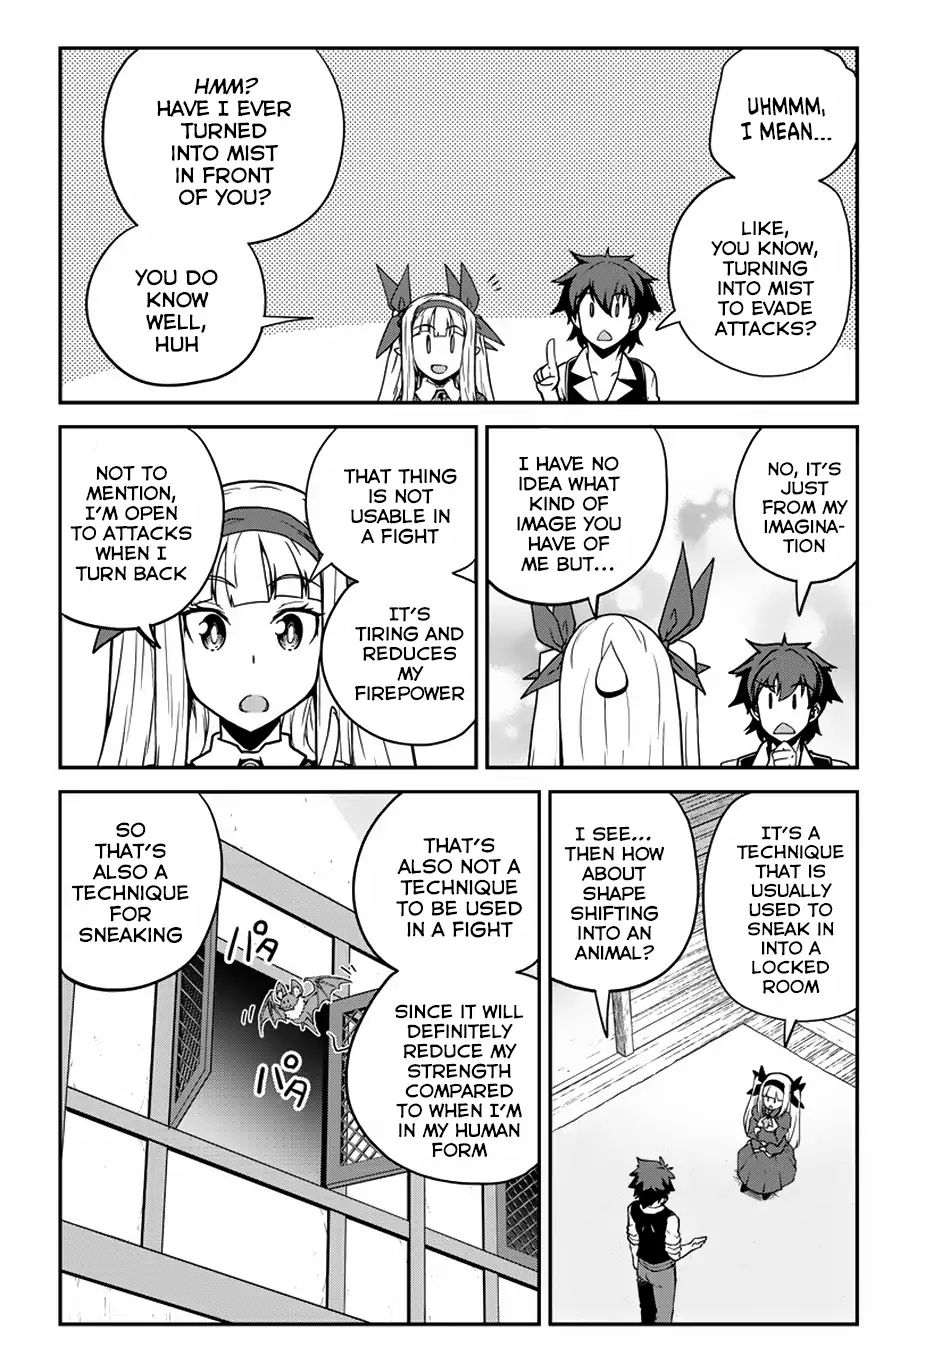 Farming Life in Another World Ch.83